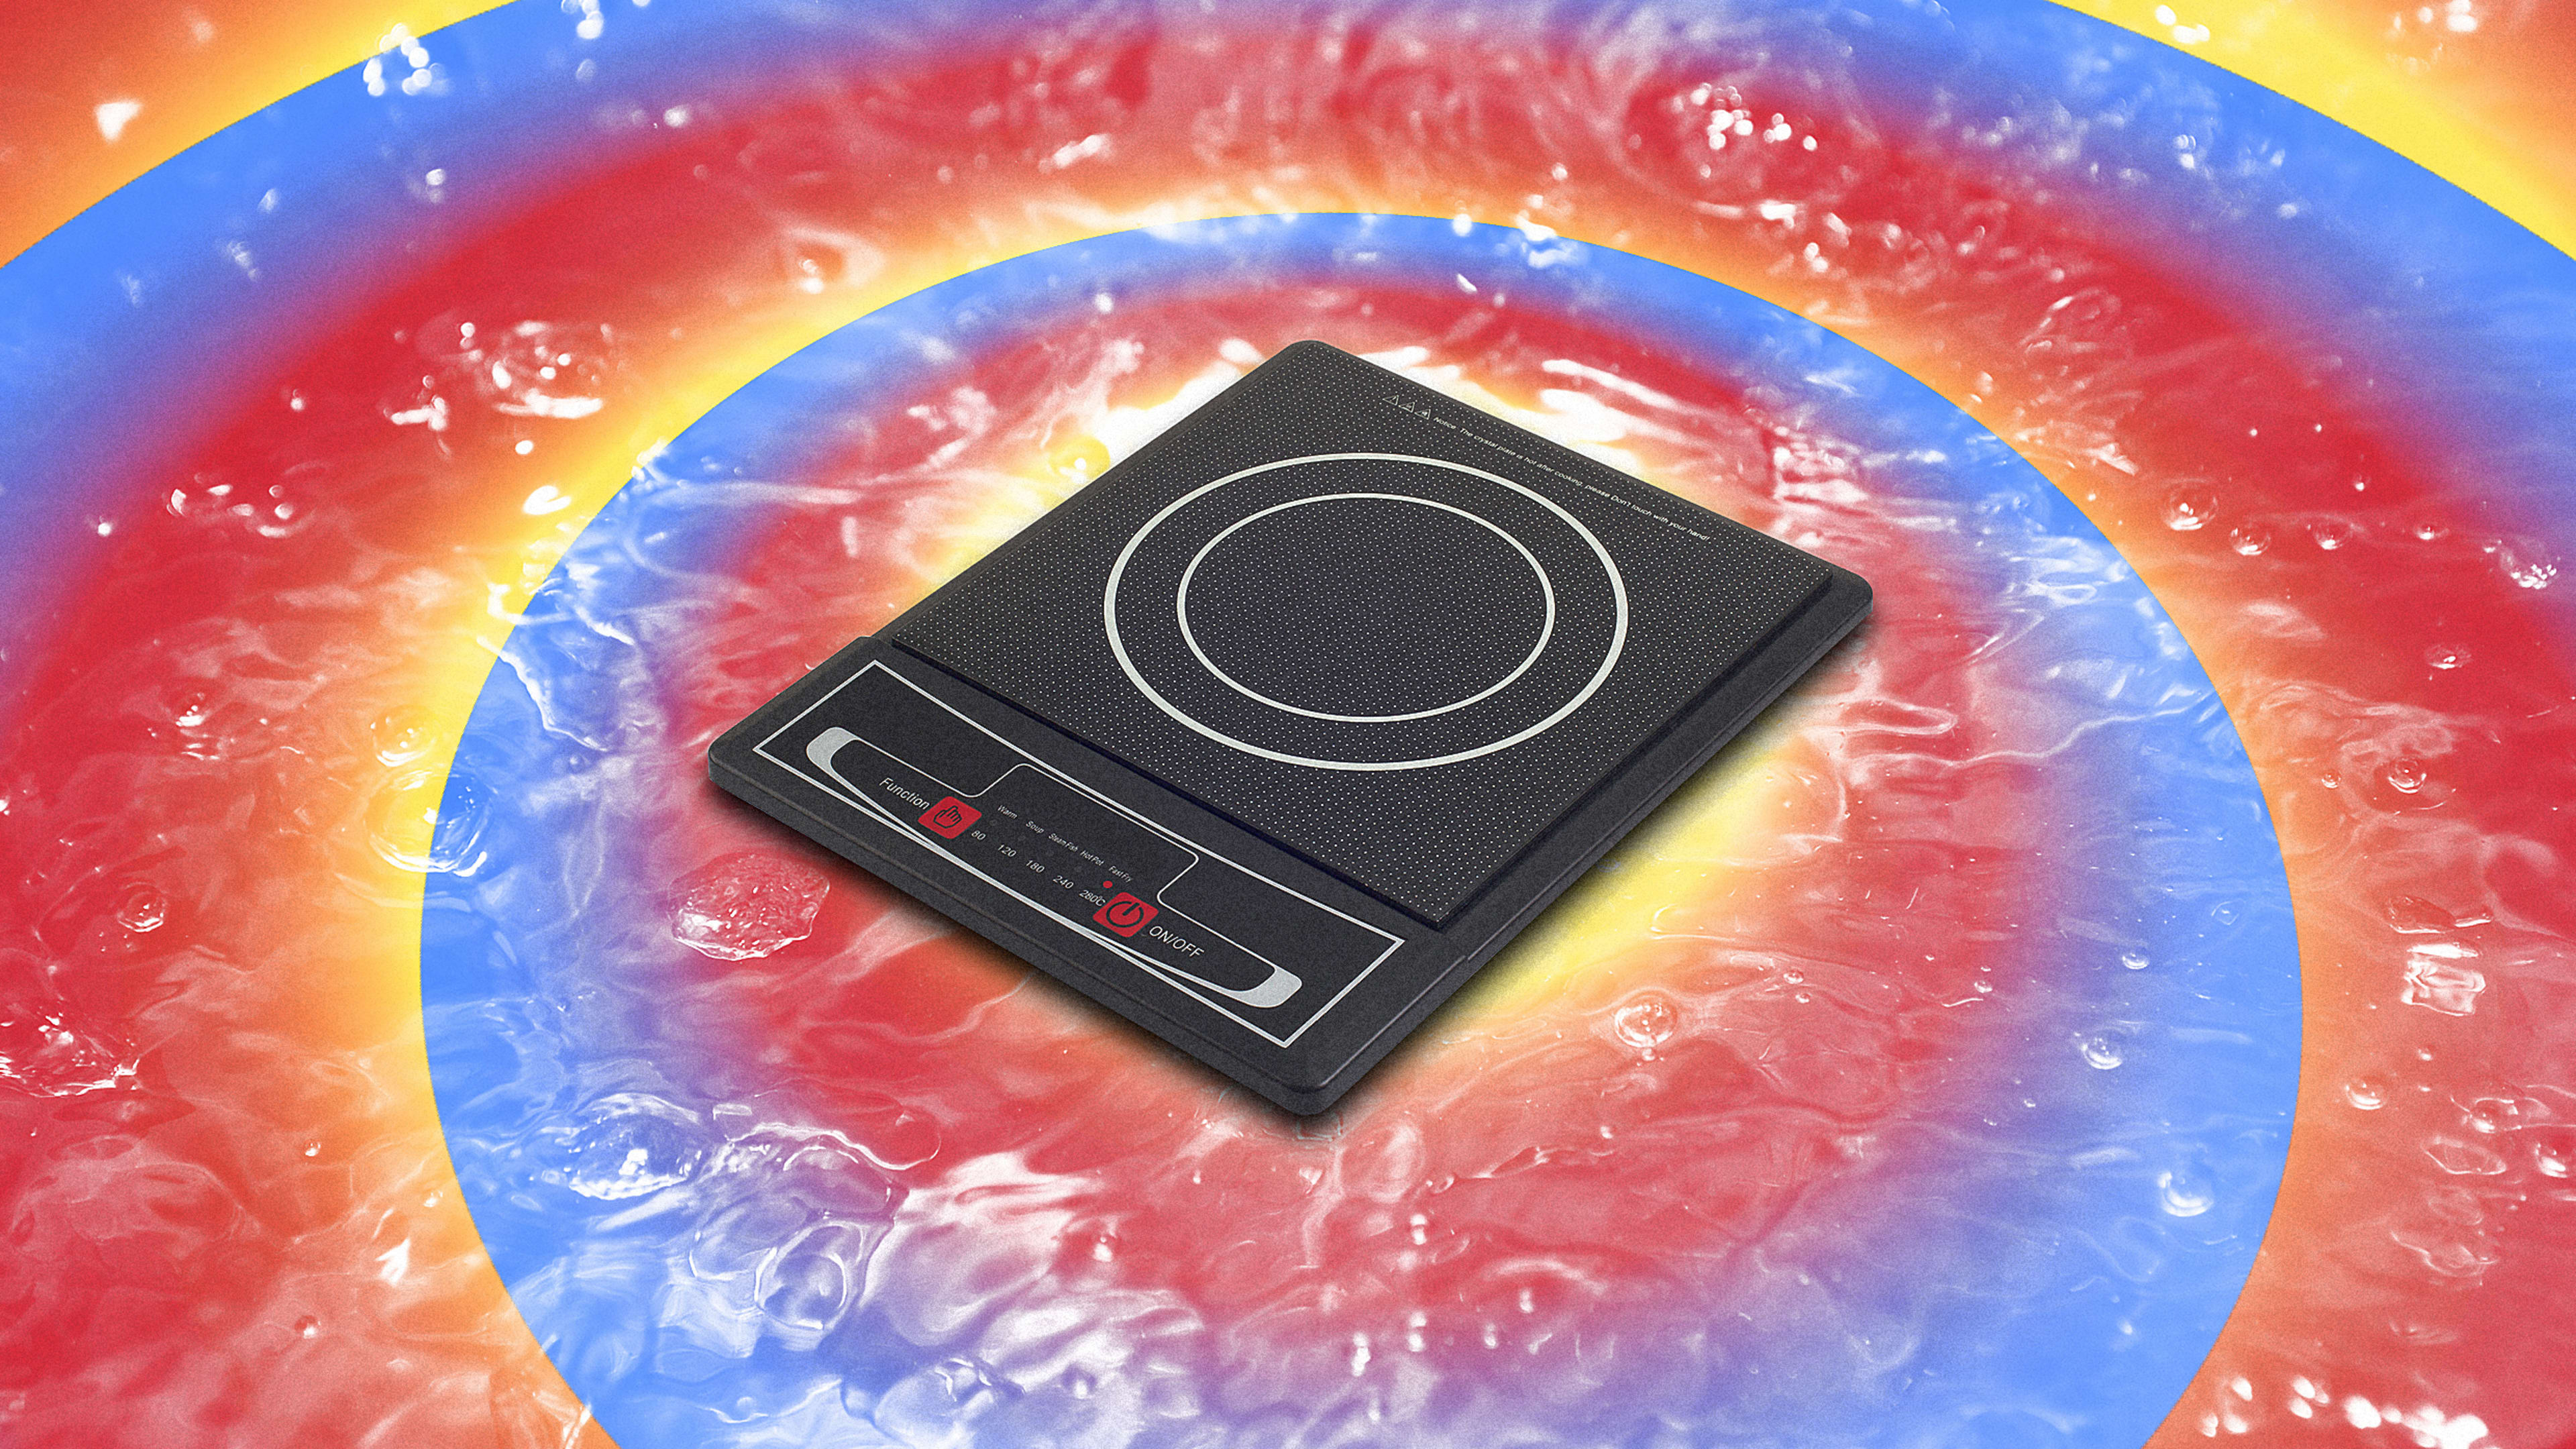 Thinking about ditching your gas stove for an induction cooktop? Try one out for free first